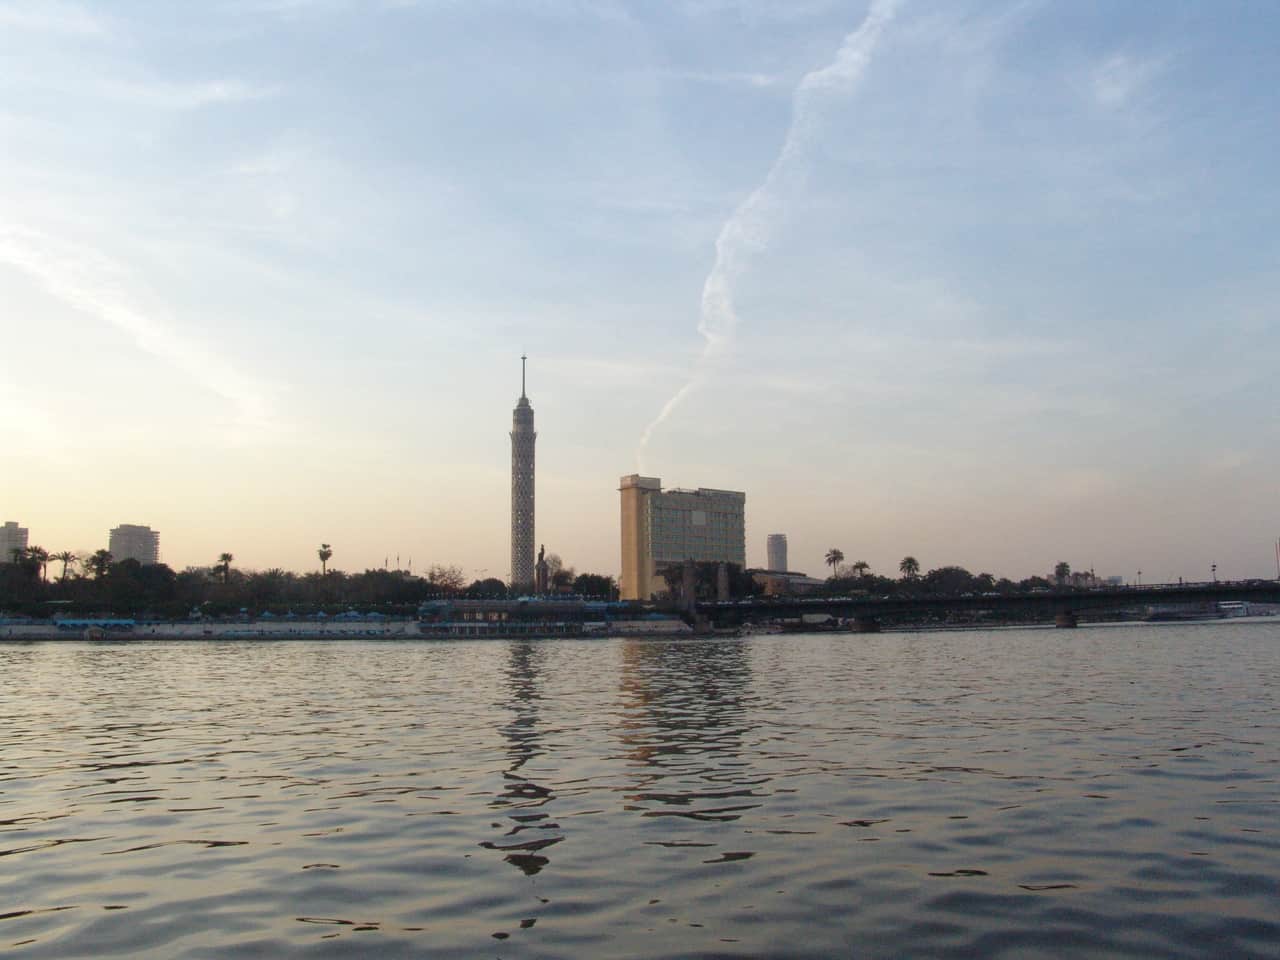 Cairo Tower on a Felucca ride in Cairo, Egypt